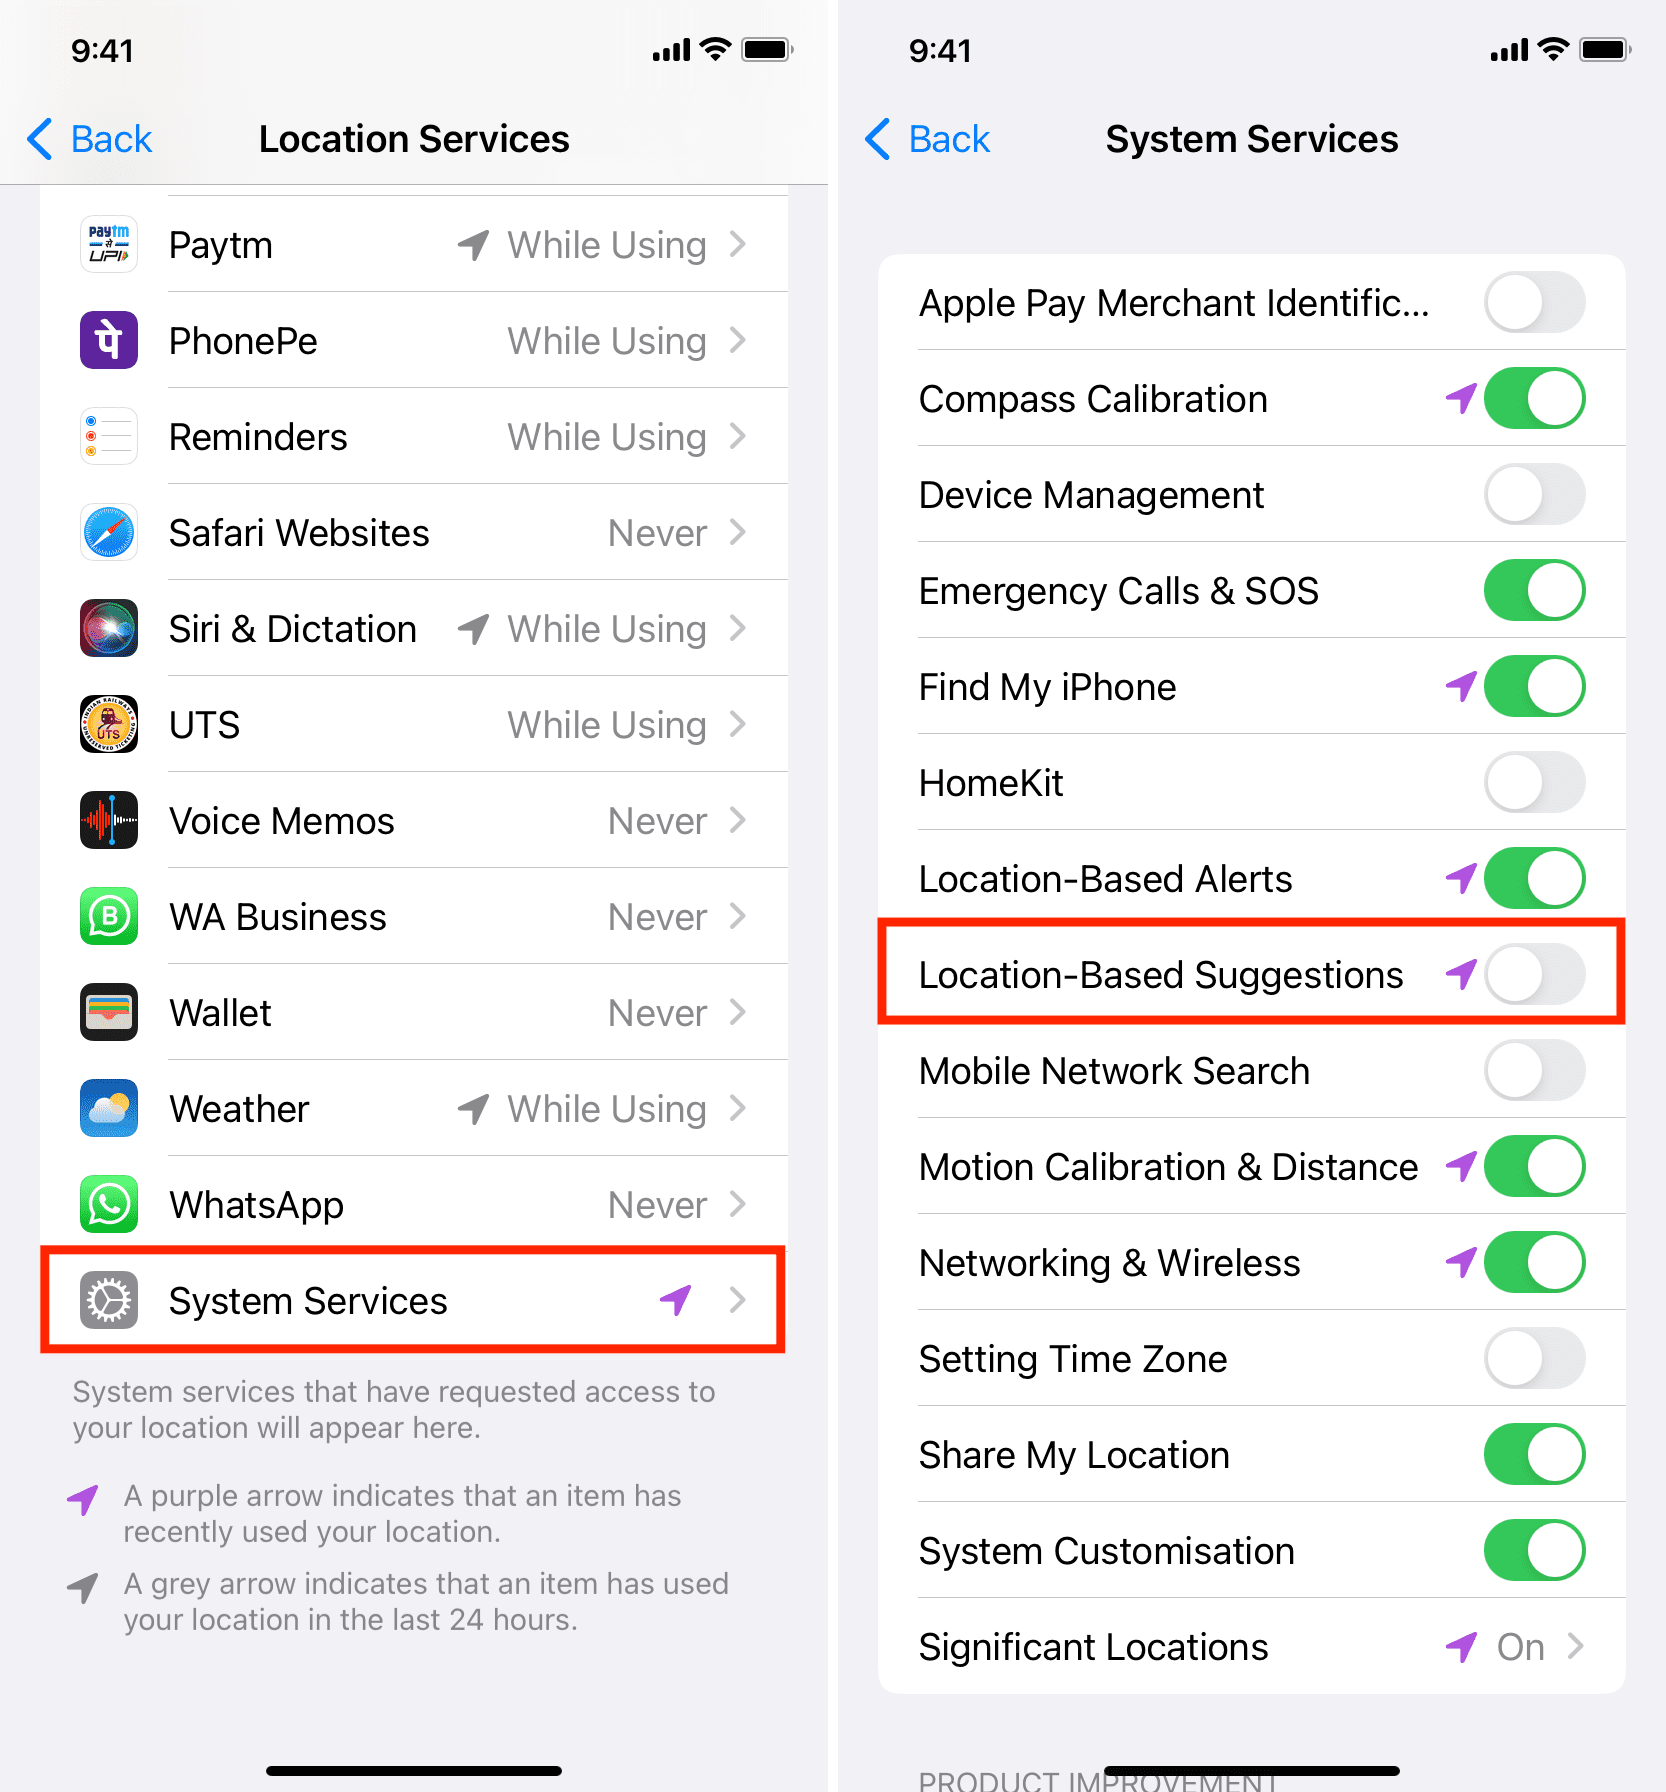 Turn off Location-Based Suggestions on iPhone